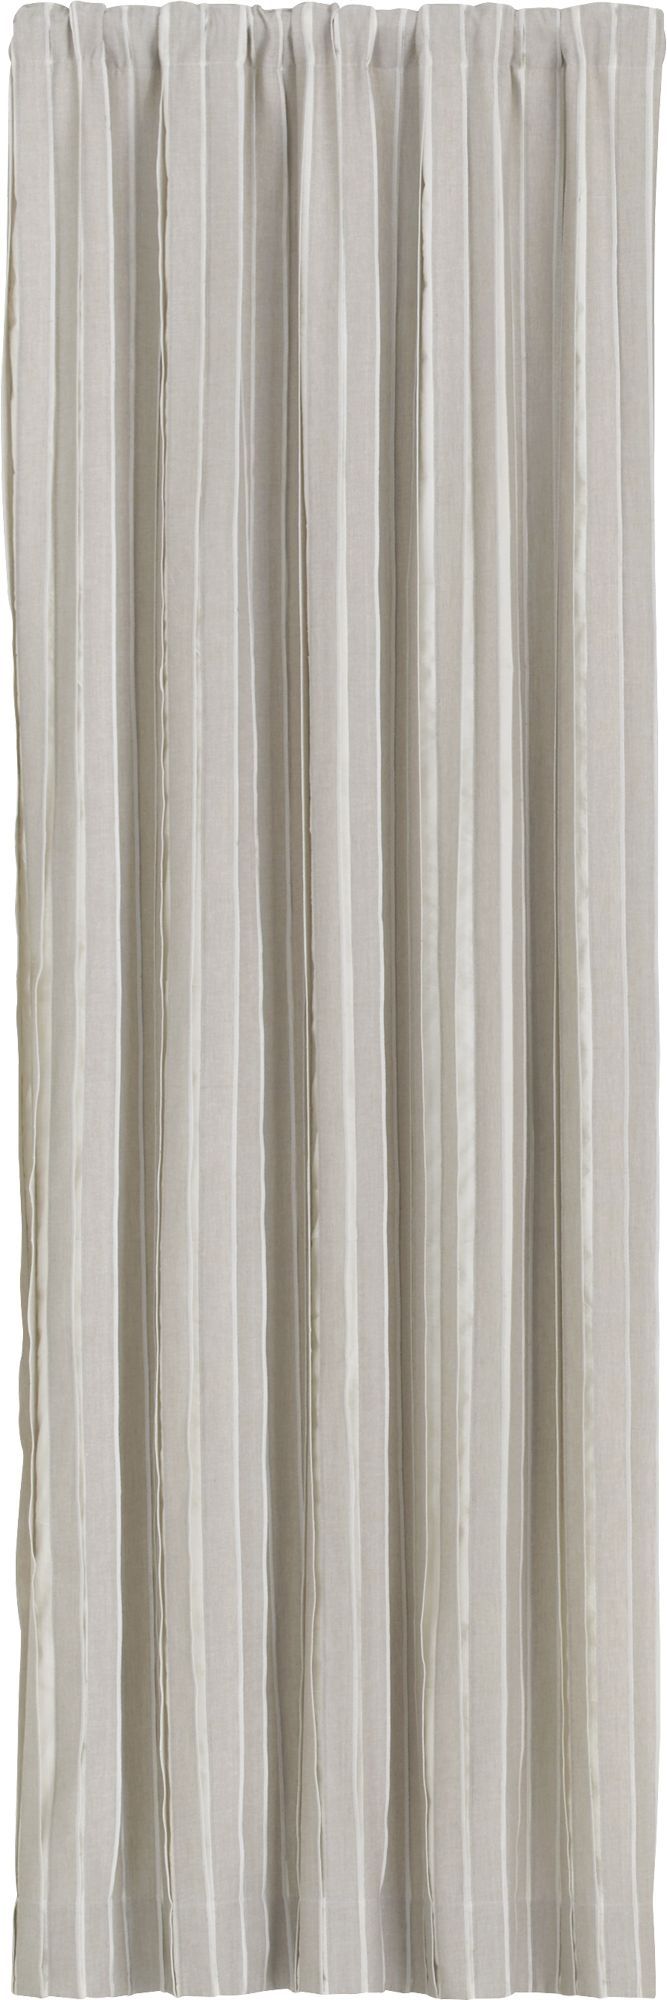 Kendal Natural Curtains Stitching Stripes And Chambray With Natural Curtain Panels (View 4 of 15)